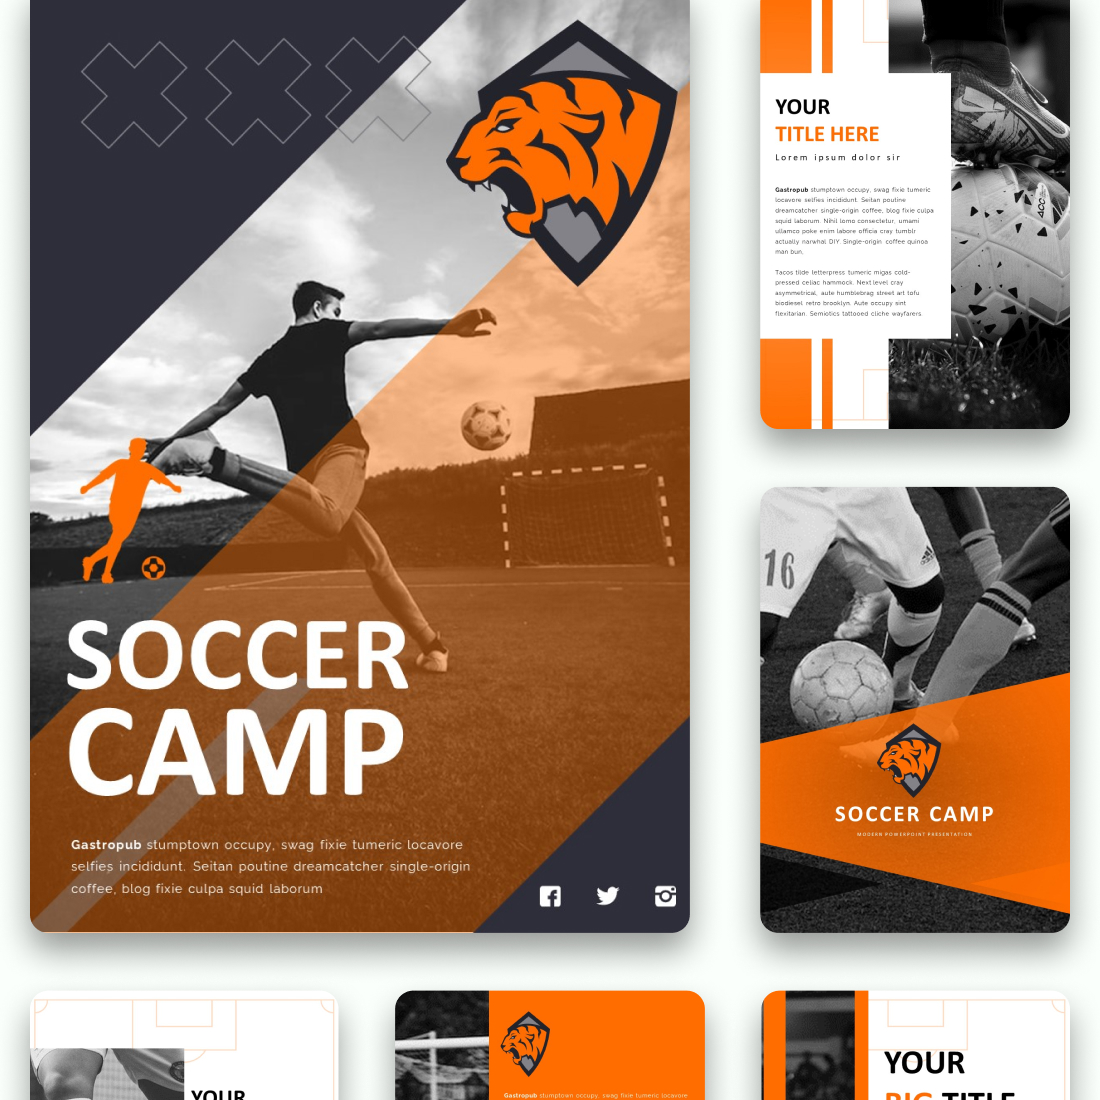 Preview soccermatch powerpoint template.